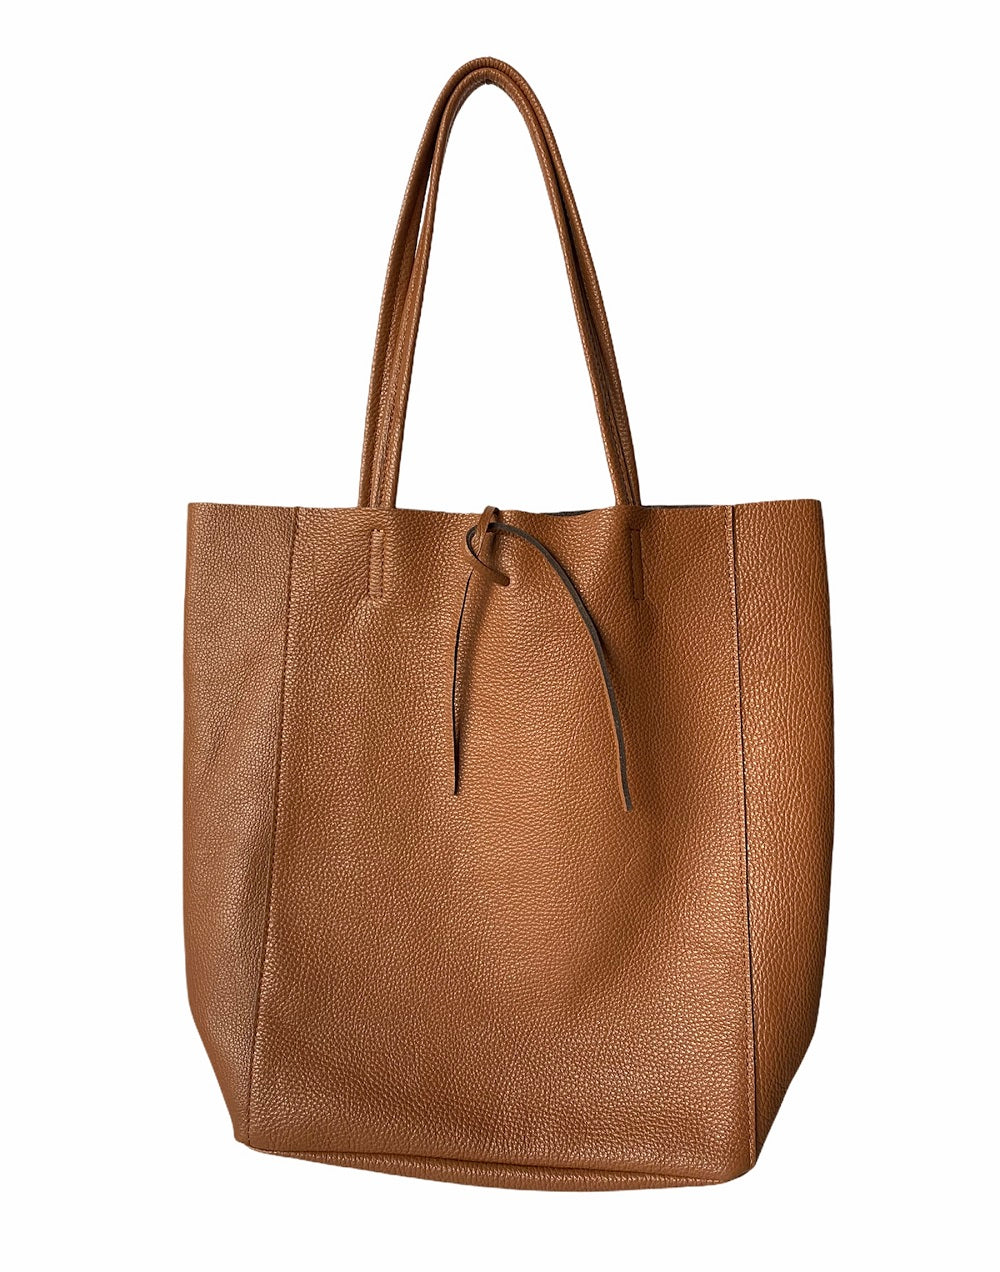 LaGaksta Taylor Tote Shoulder Bag Soft Italian Leather - Casual Travel Everyday Tote